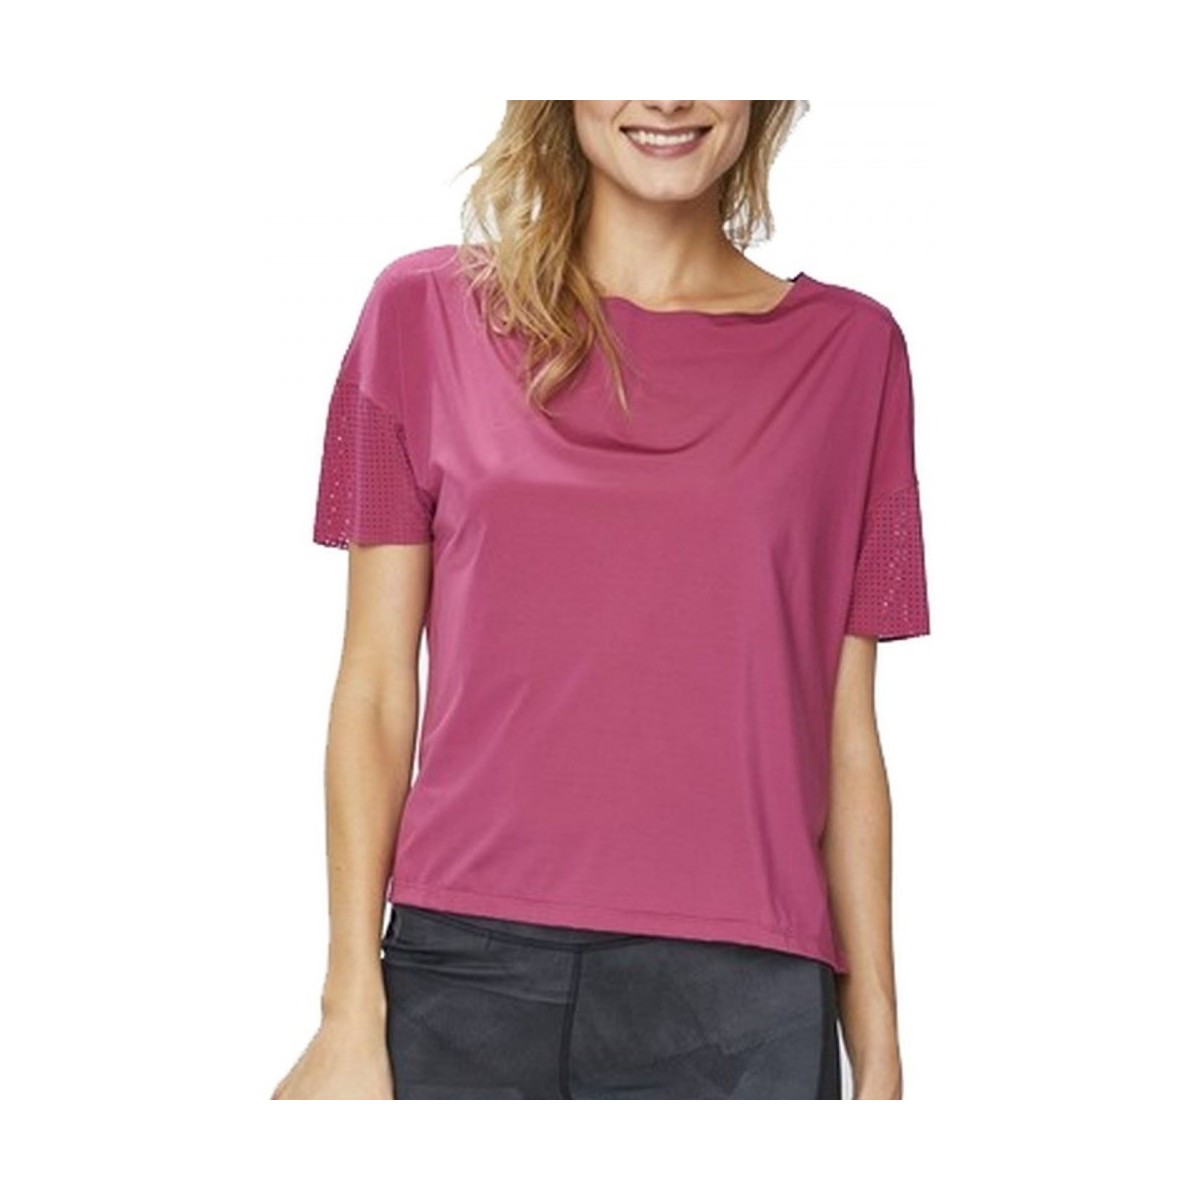 Textiel Dames T-shirts & Polo’s Reebok Sport Perforated Tee Roze